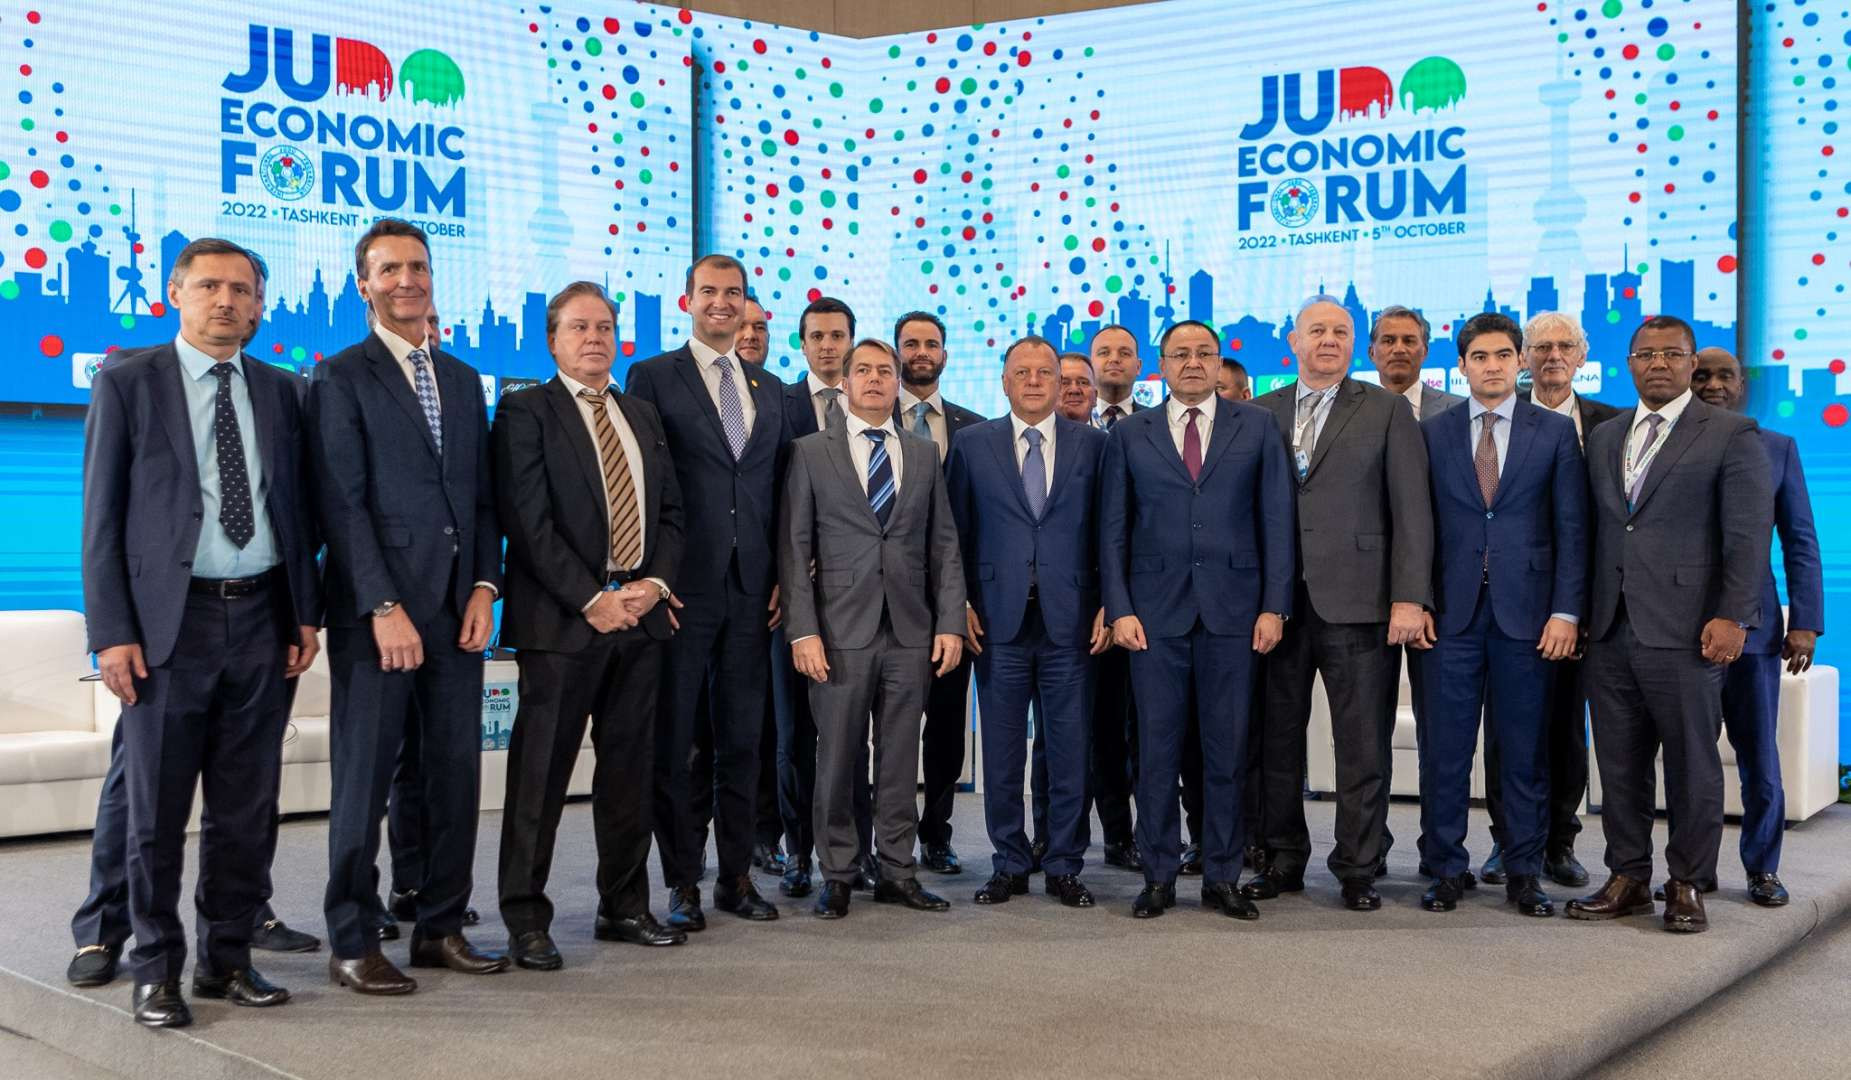 Today also saw the inaugural edition of the Judo Economic Forum take place in Tashkent ©IJF